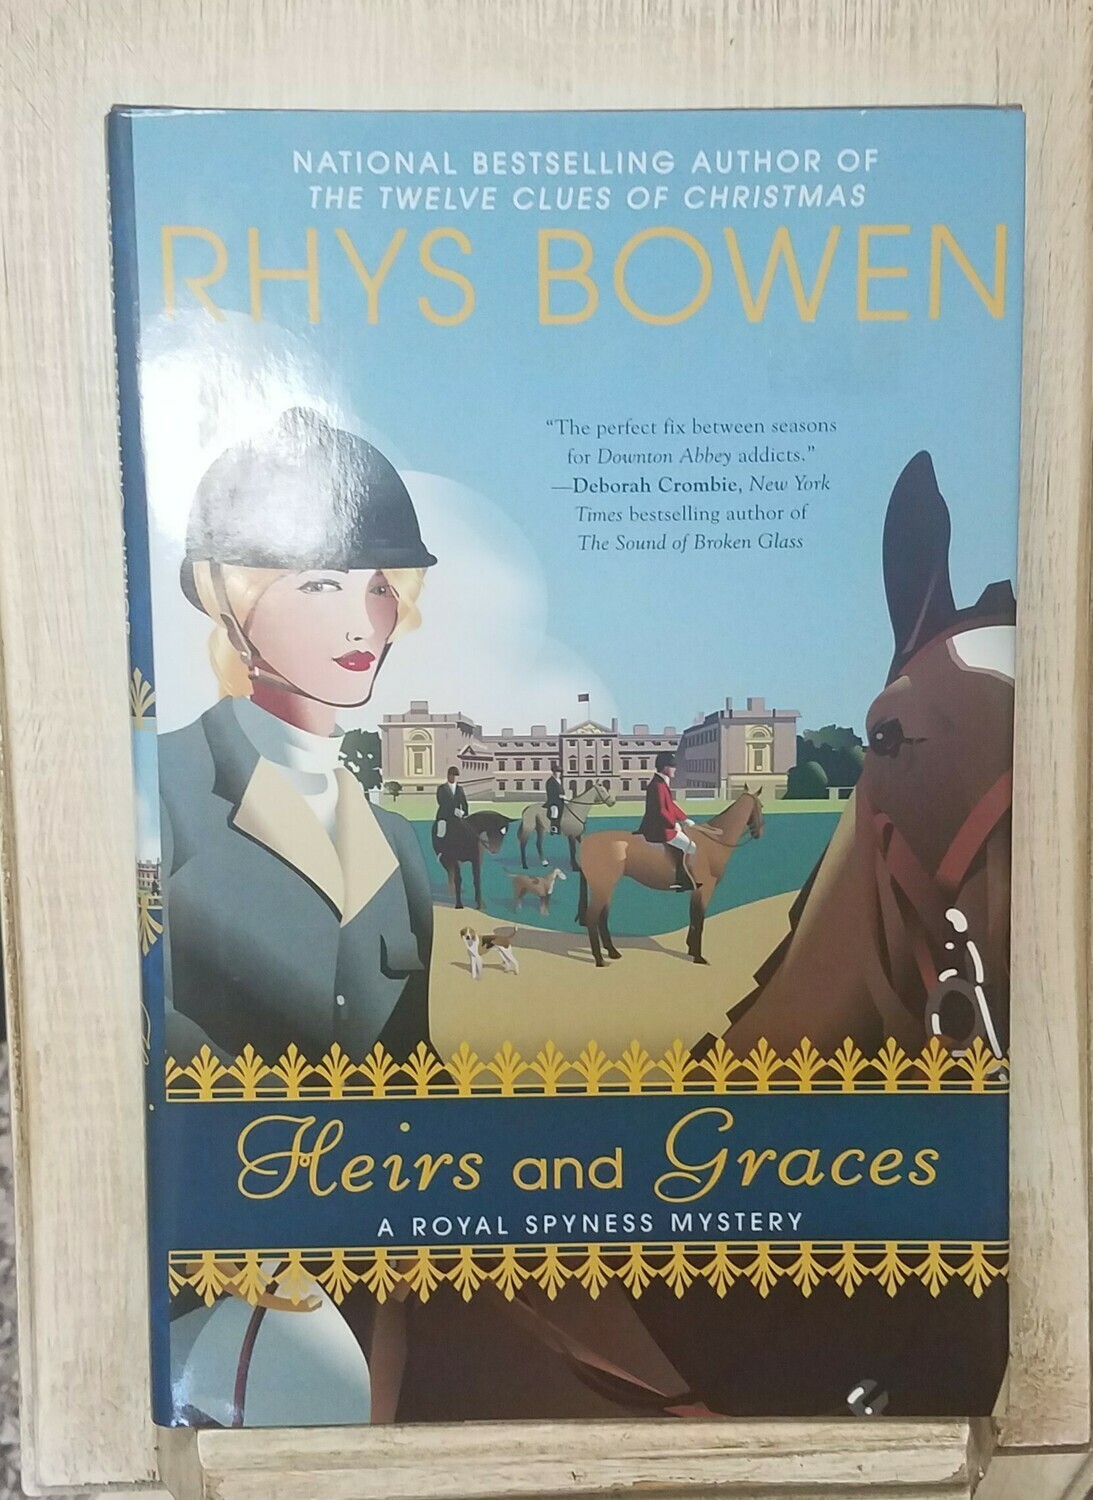 Heirs and Graces by Rhys Bowen